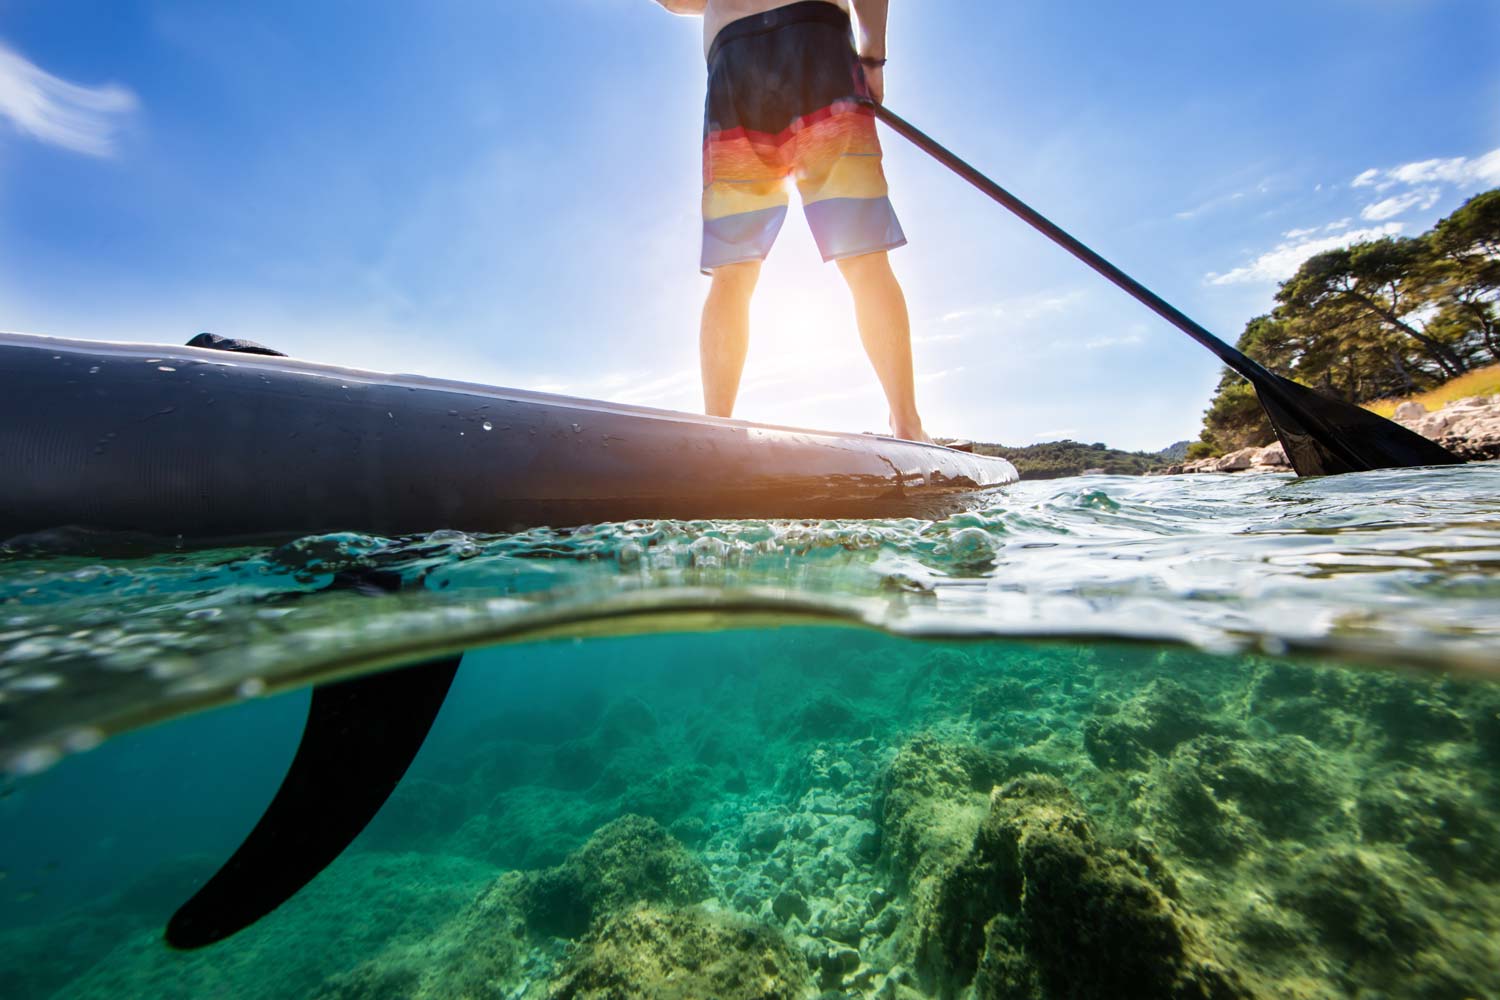 Photo showing a person paddleboarding